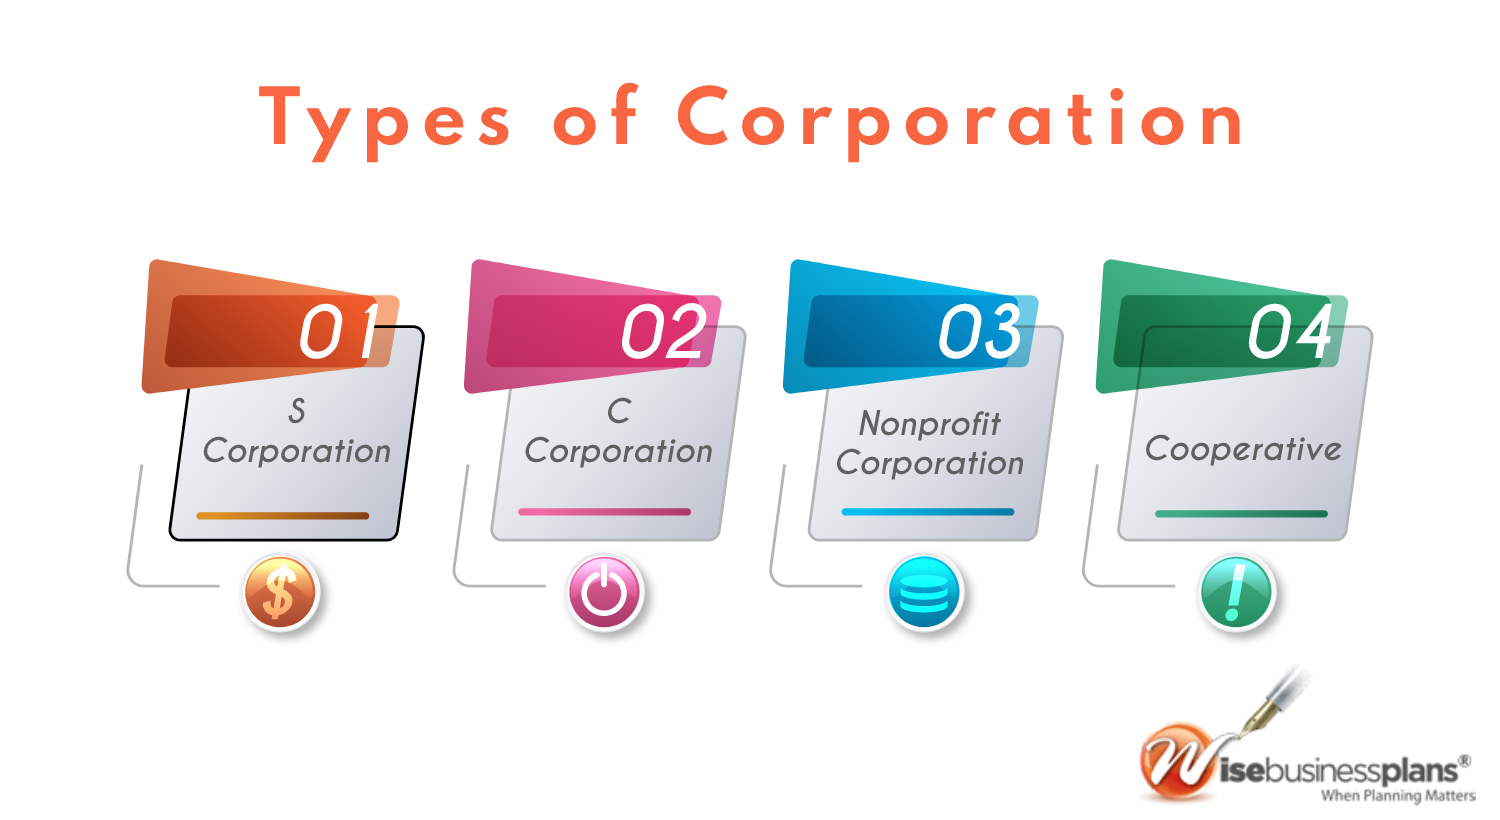 Types of corporation in business structures